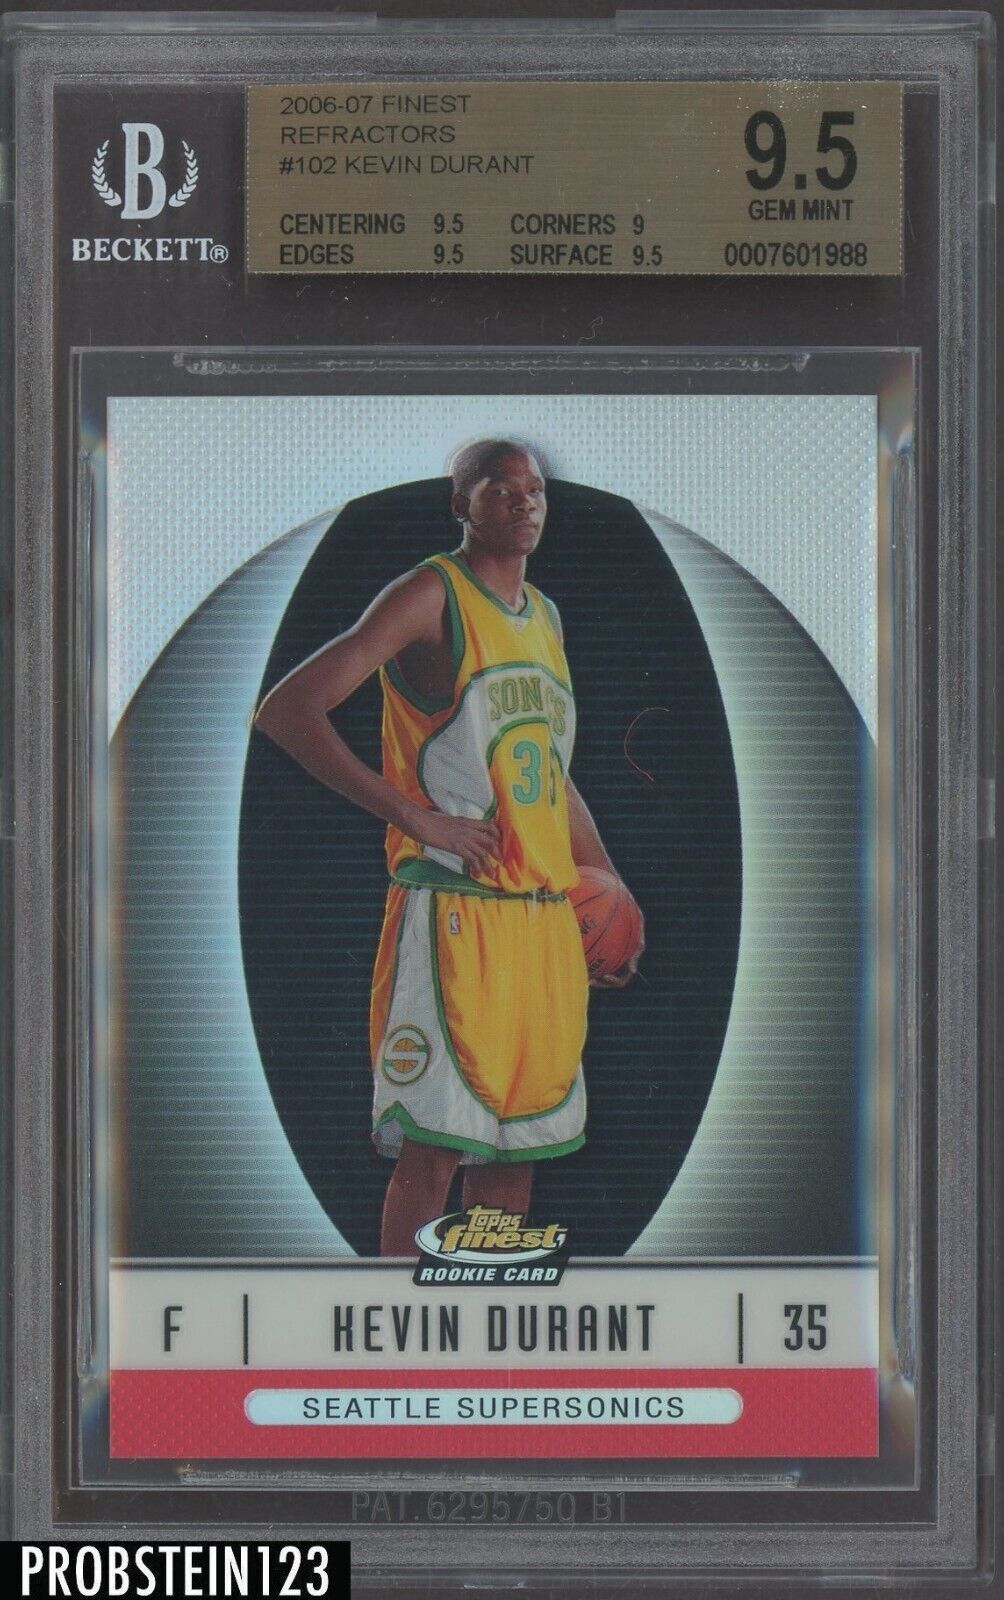 2006-07 Topps Finest Refractor #102 Kevin Durant 46/399 BGS 9.5 " PRISTINE "